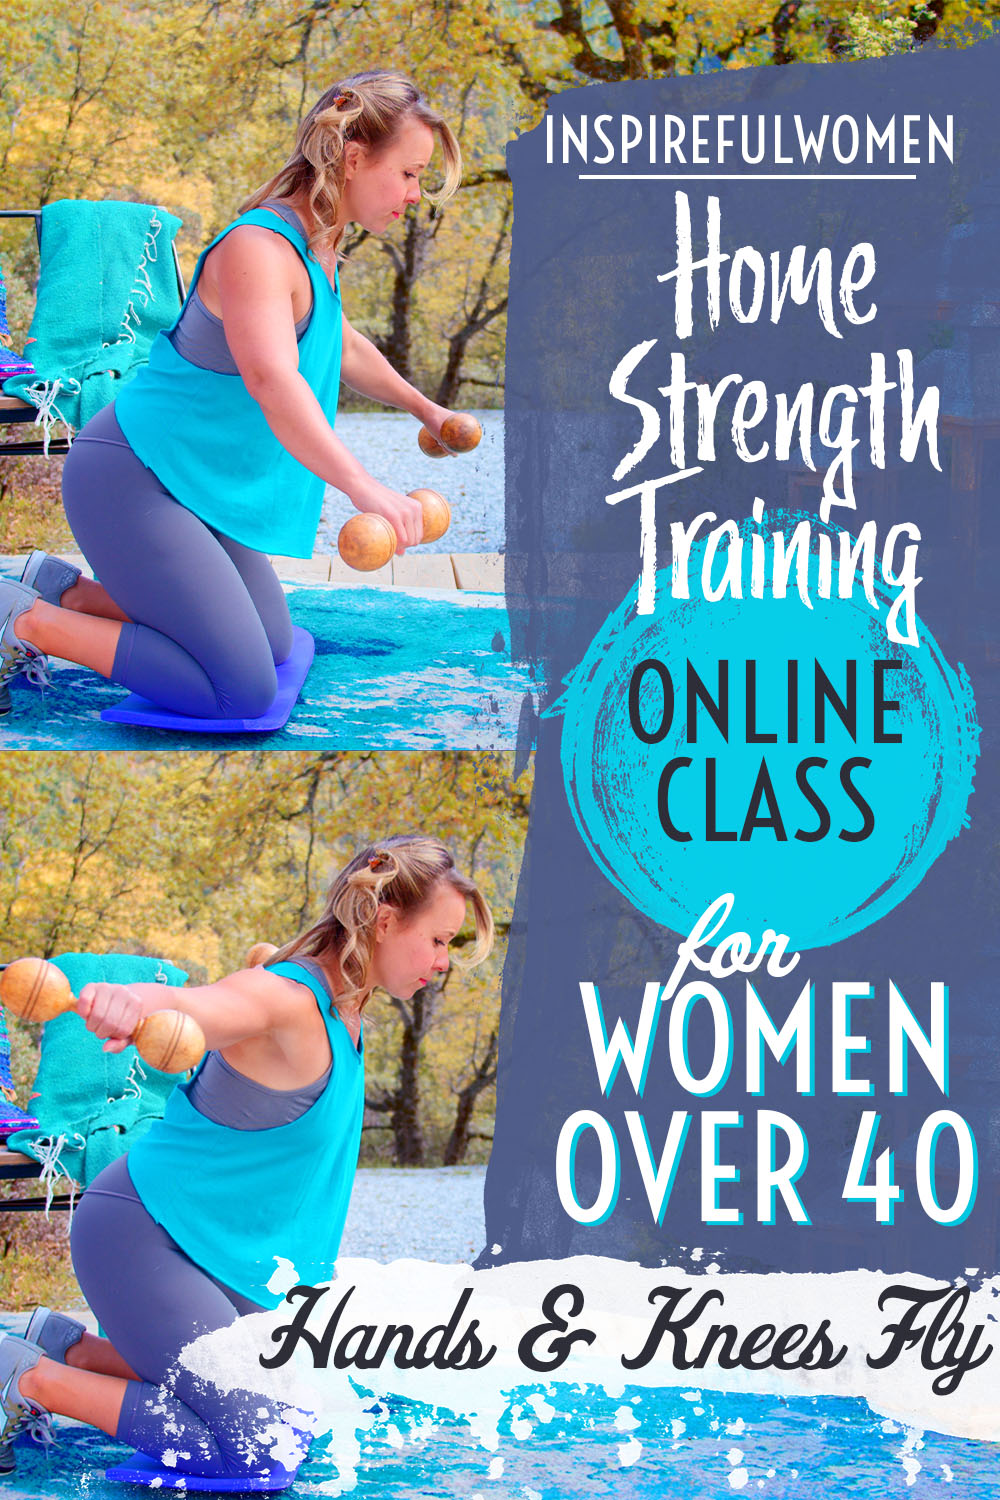 hands-and-knees-dumbbell-rear-delt-fly-shoulder-strength-exercise-at-home-women-over-40